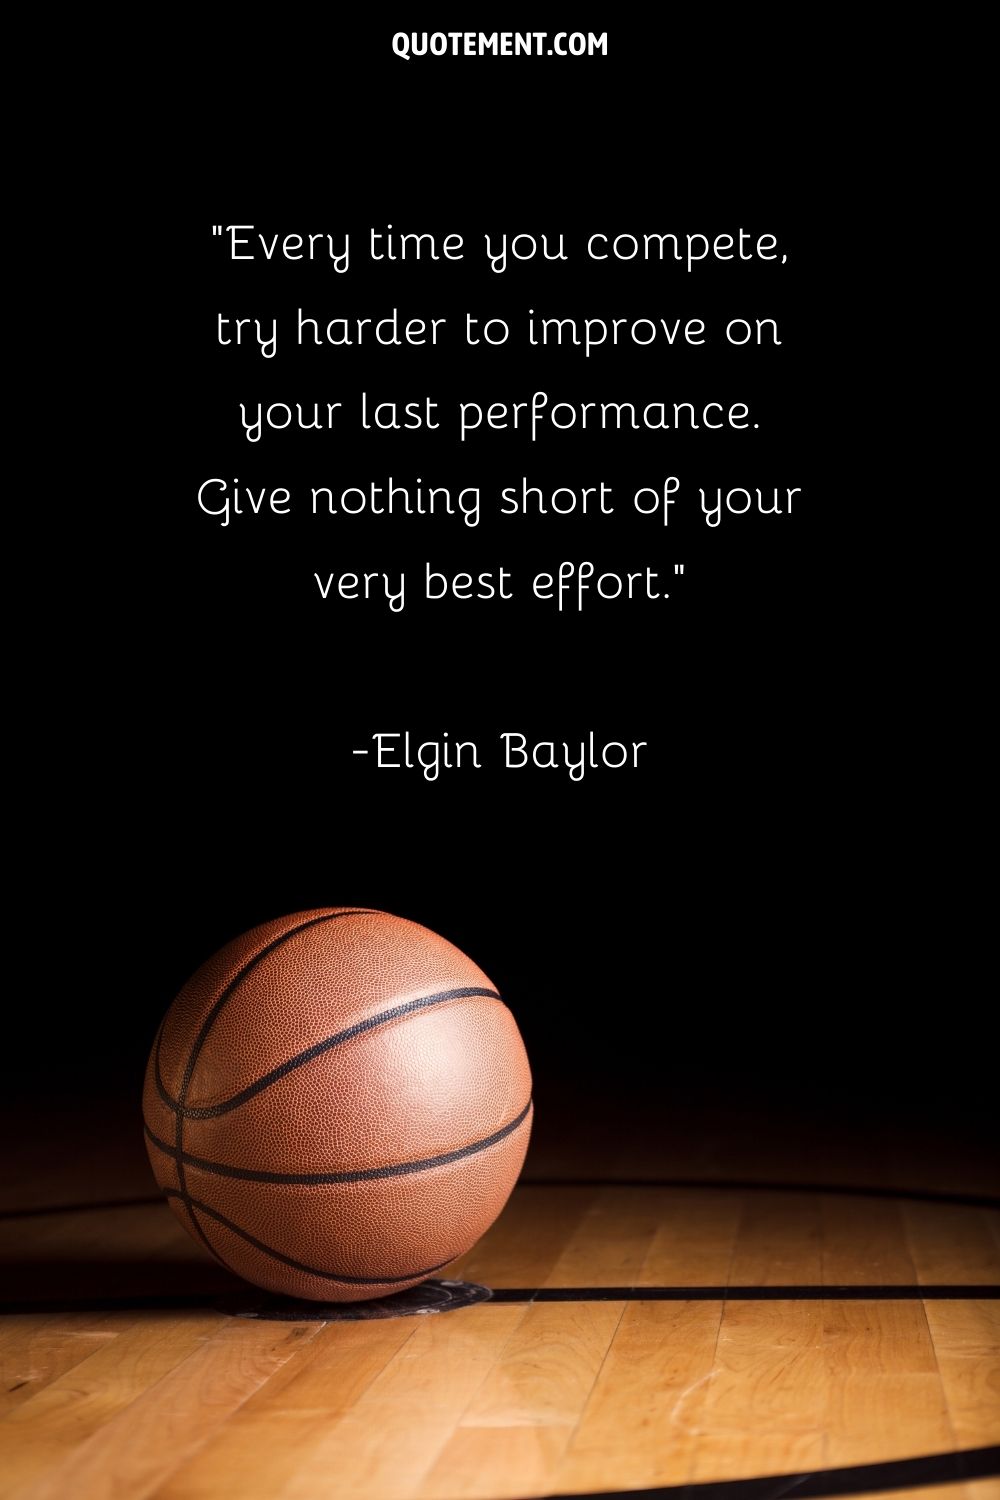 Ball sits still on the parquet representing try your best quote.
